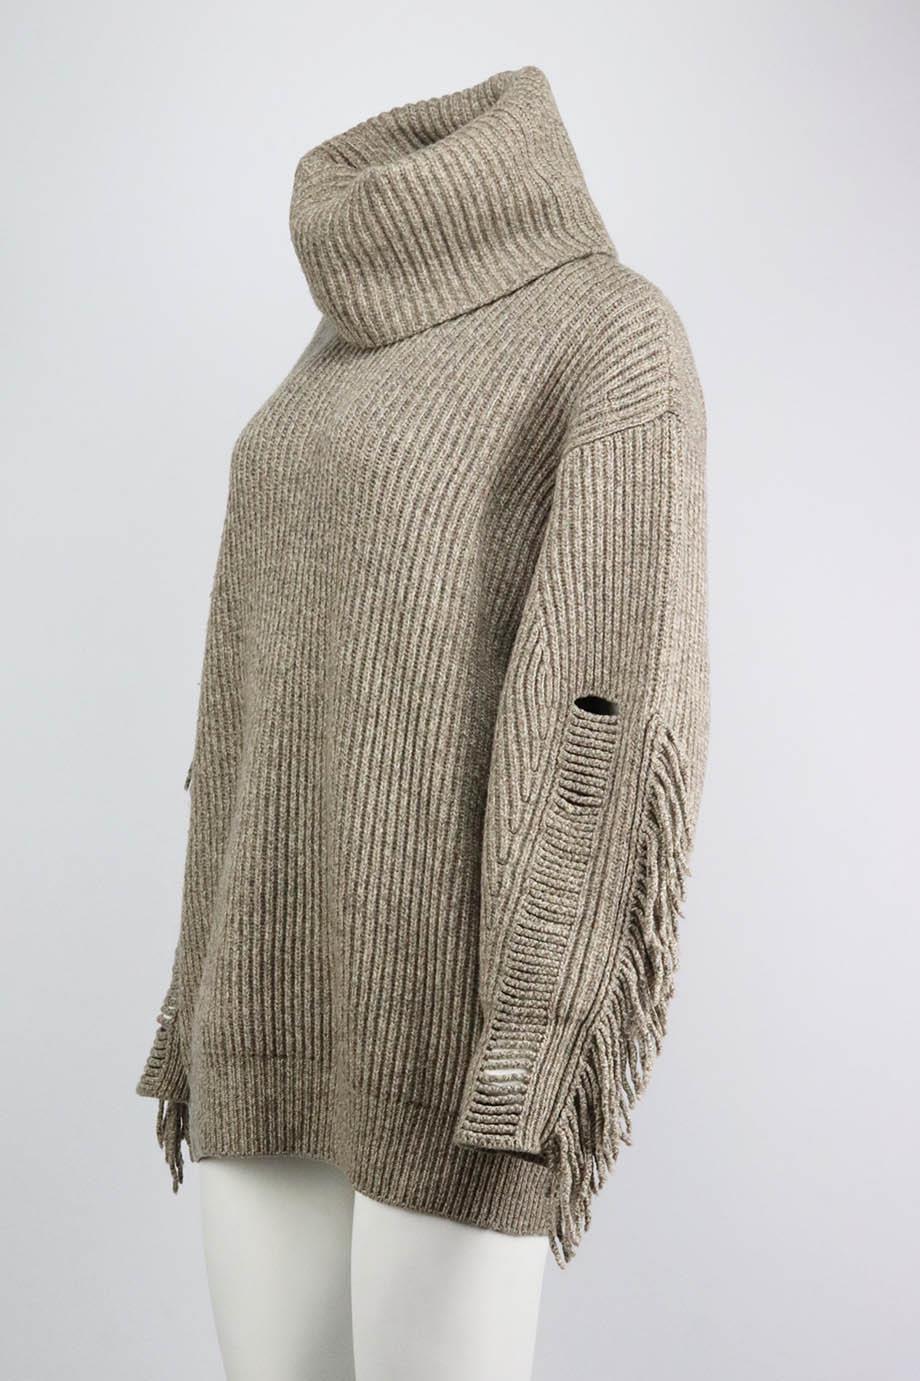 This sweater by Stella McCartney is spun from regenerated cashmere blended with wool for softness, the hand-finished fringing on the sleeves reflects the playful energy of the collection. Beige cashmere-blend. Slips on. 95% Cashmere, 5% wool. Size: